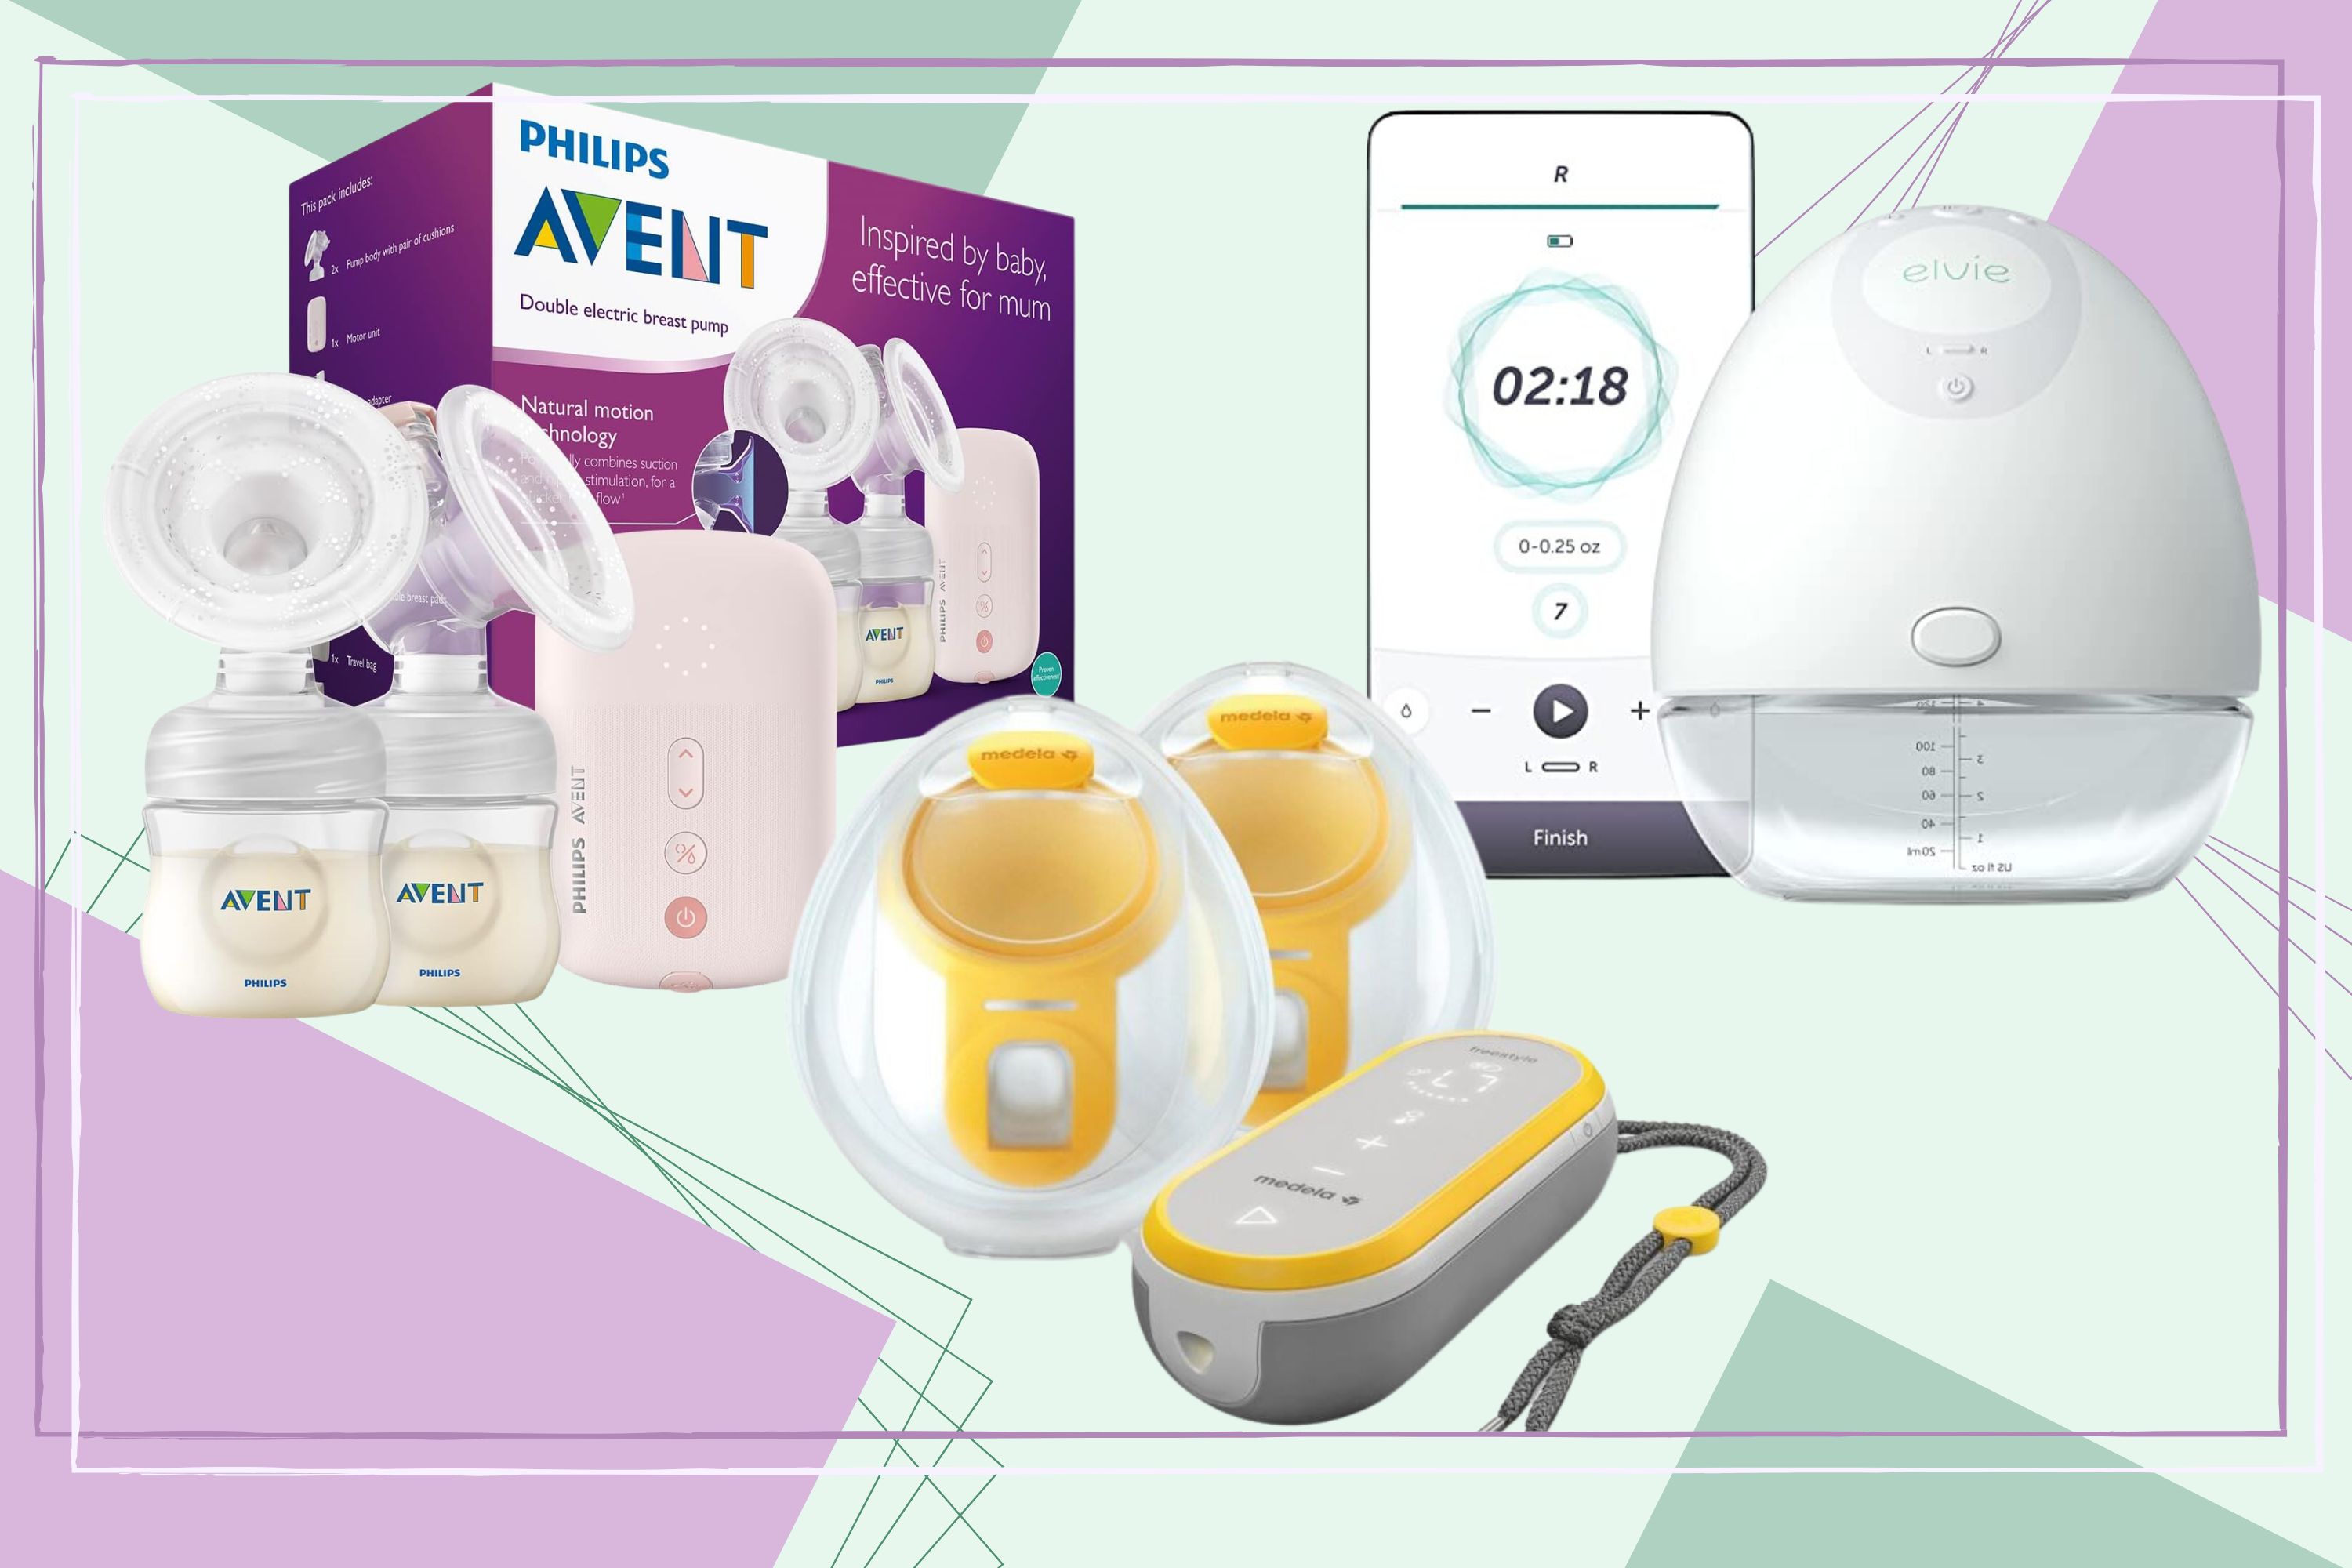 Medela Swing Maxi Flex double breast pump review - Breast pumps - Feeding  Products